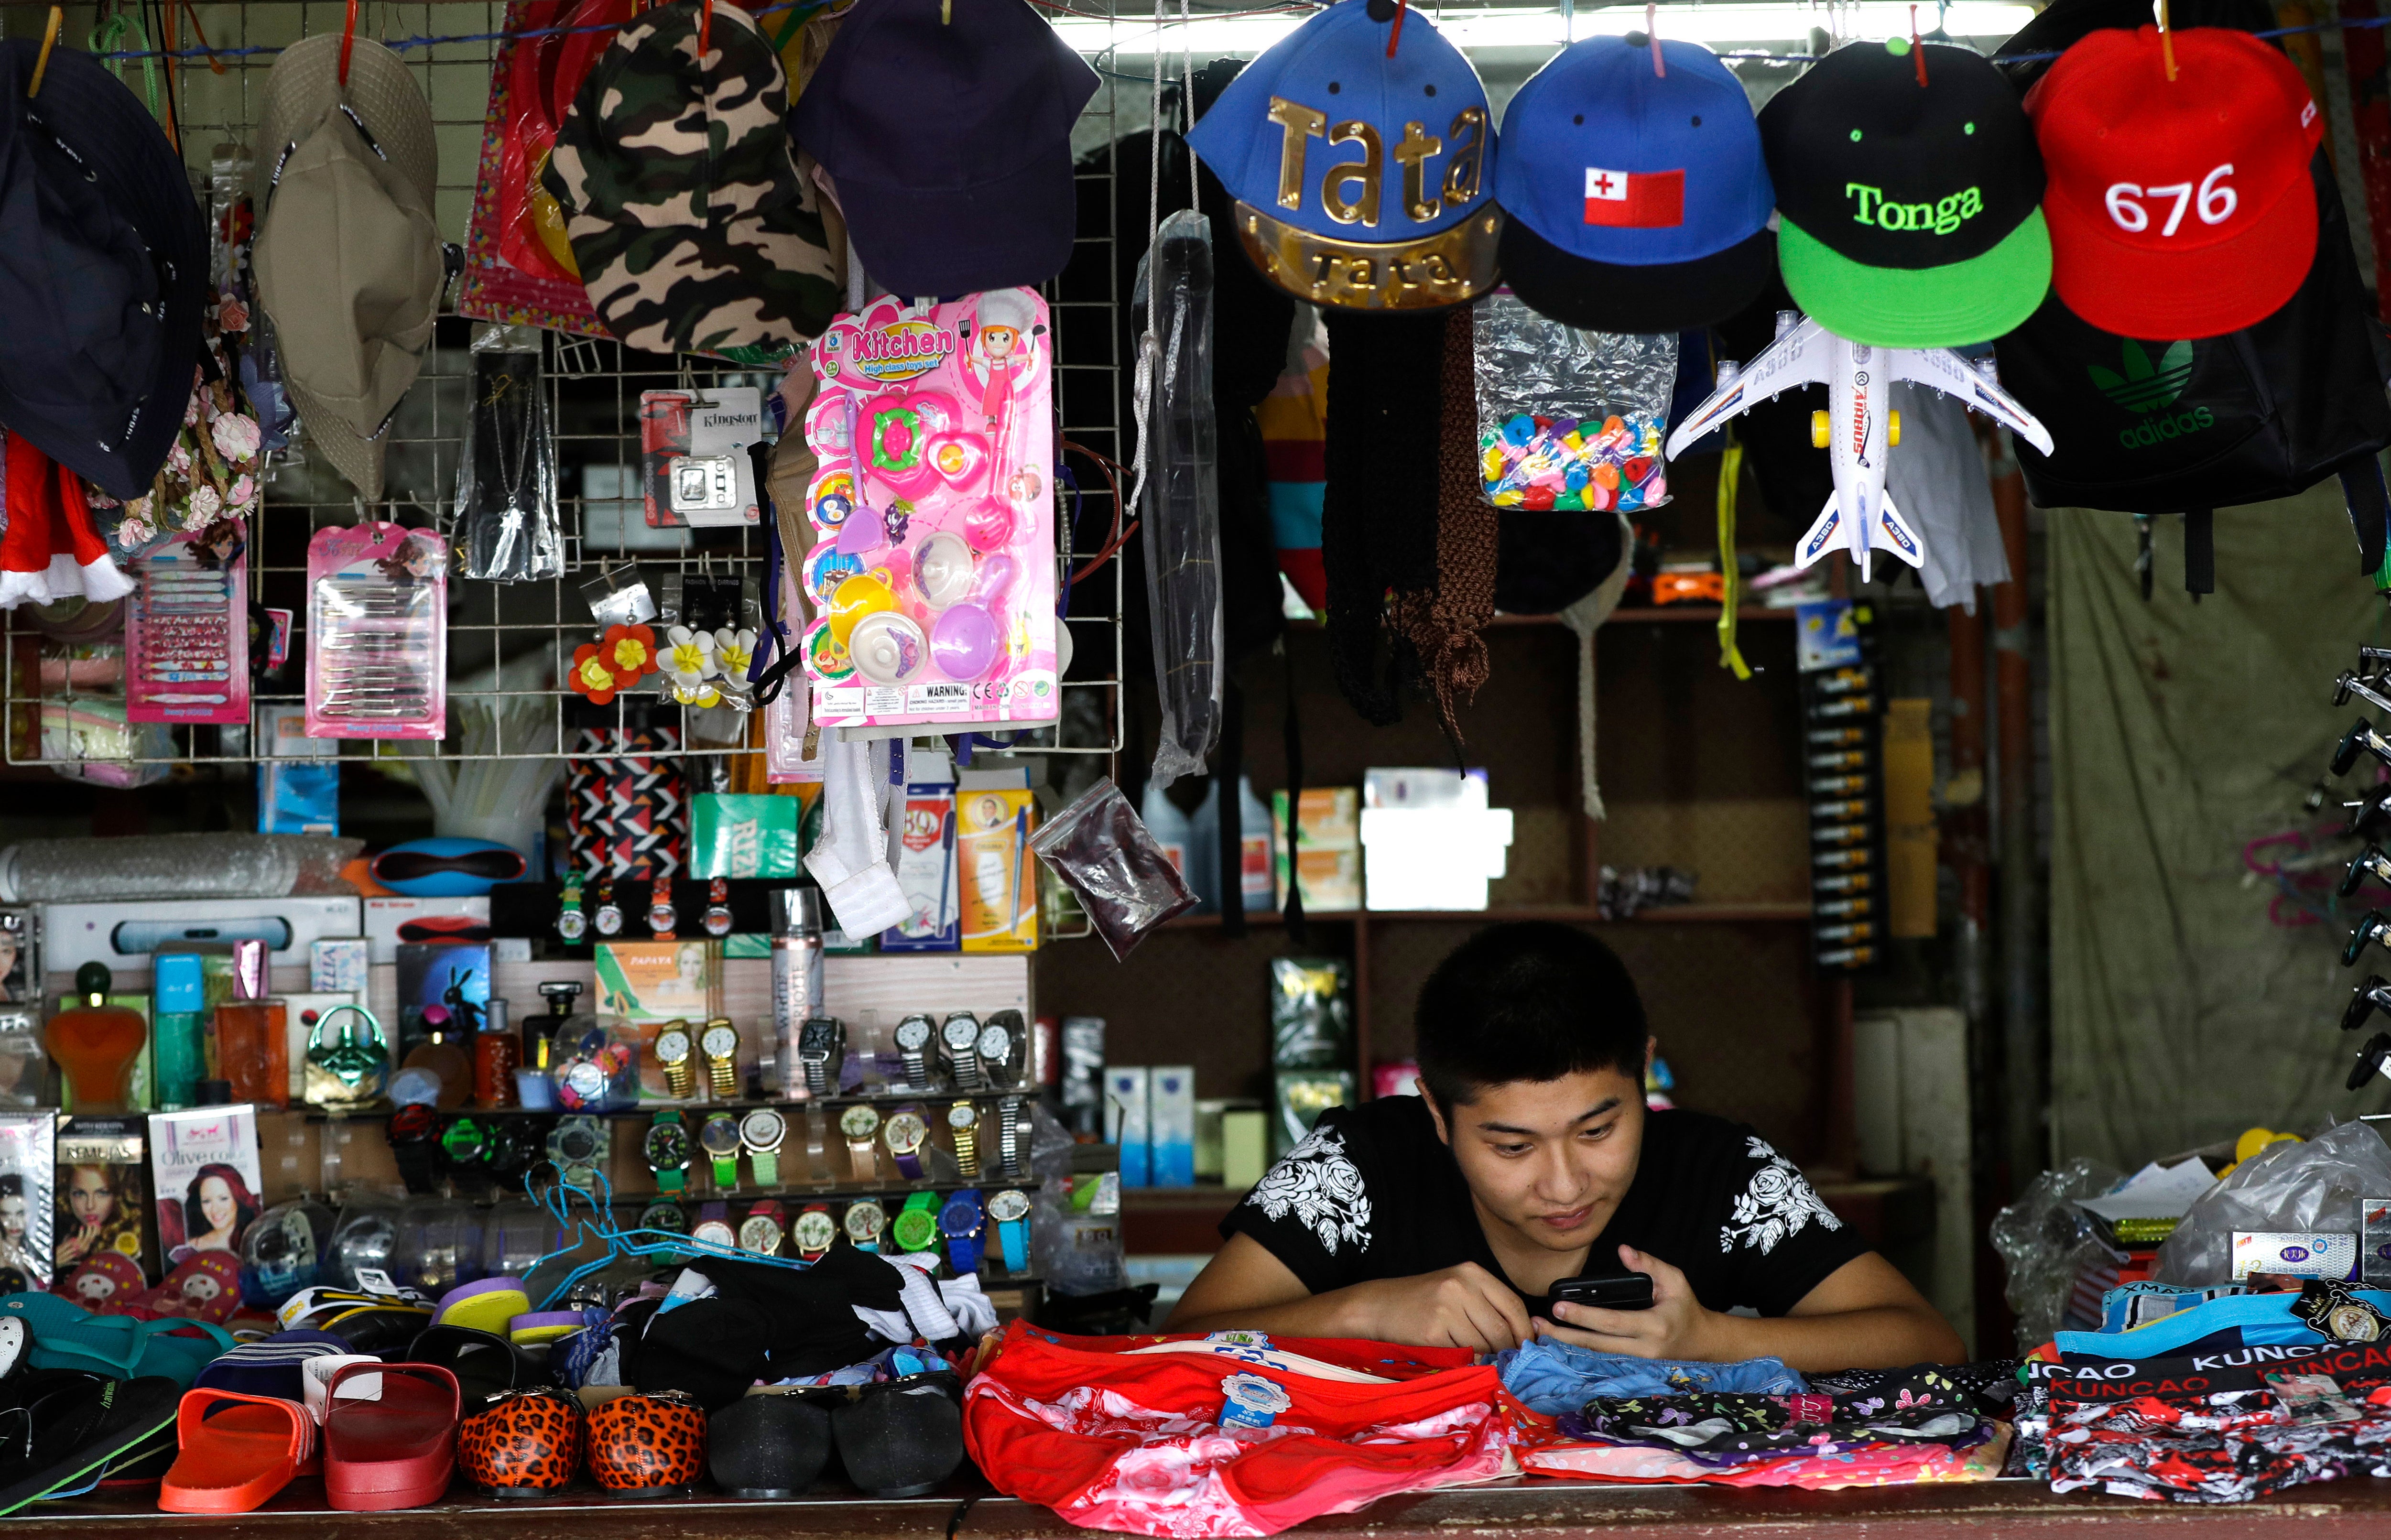 File: A shopkeeper waits for business in Nuku'alofa, Tonga in April 2019. The island nation of Tonga has reported its first-ever case of Covid-19, Friday 29 Oct 2021 after a traveler from New Zealand tested positive